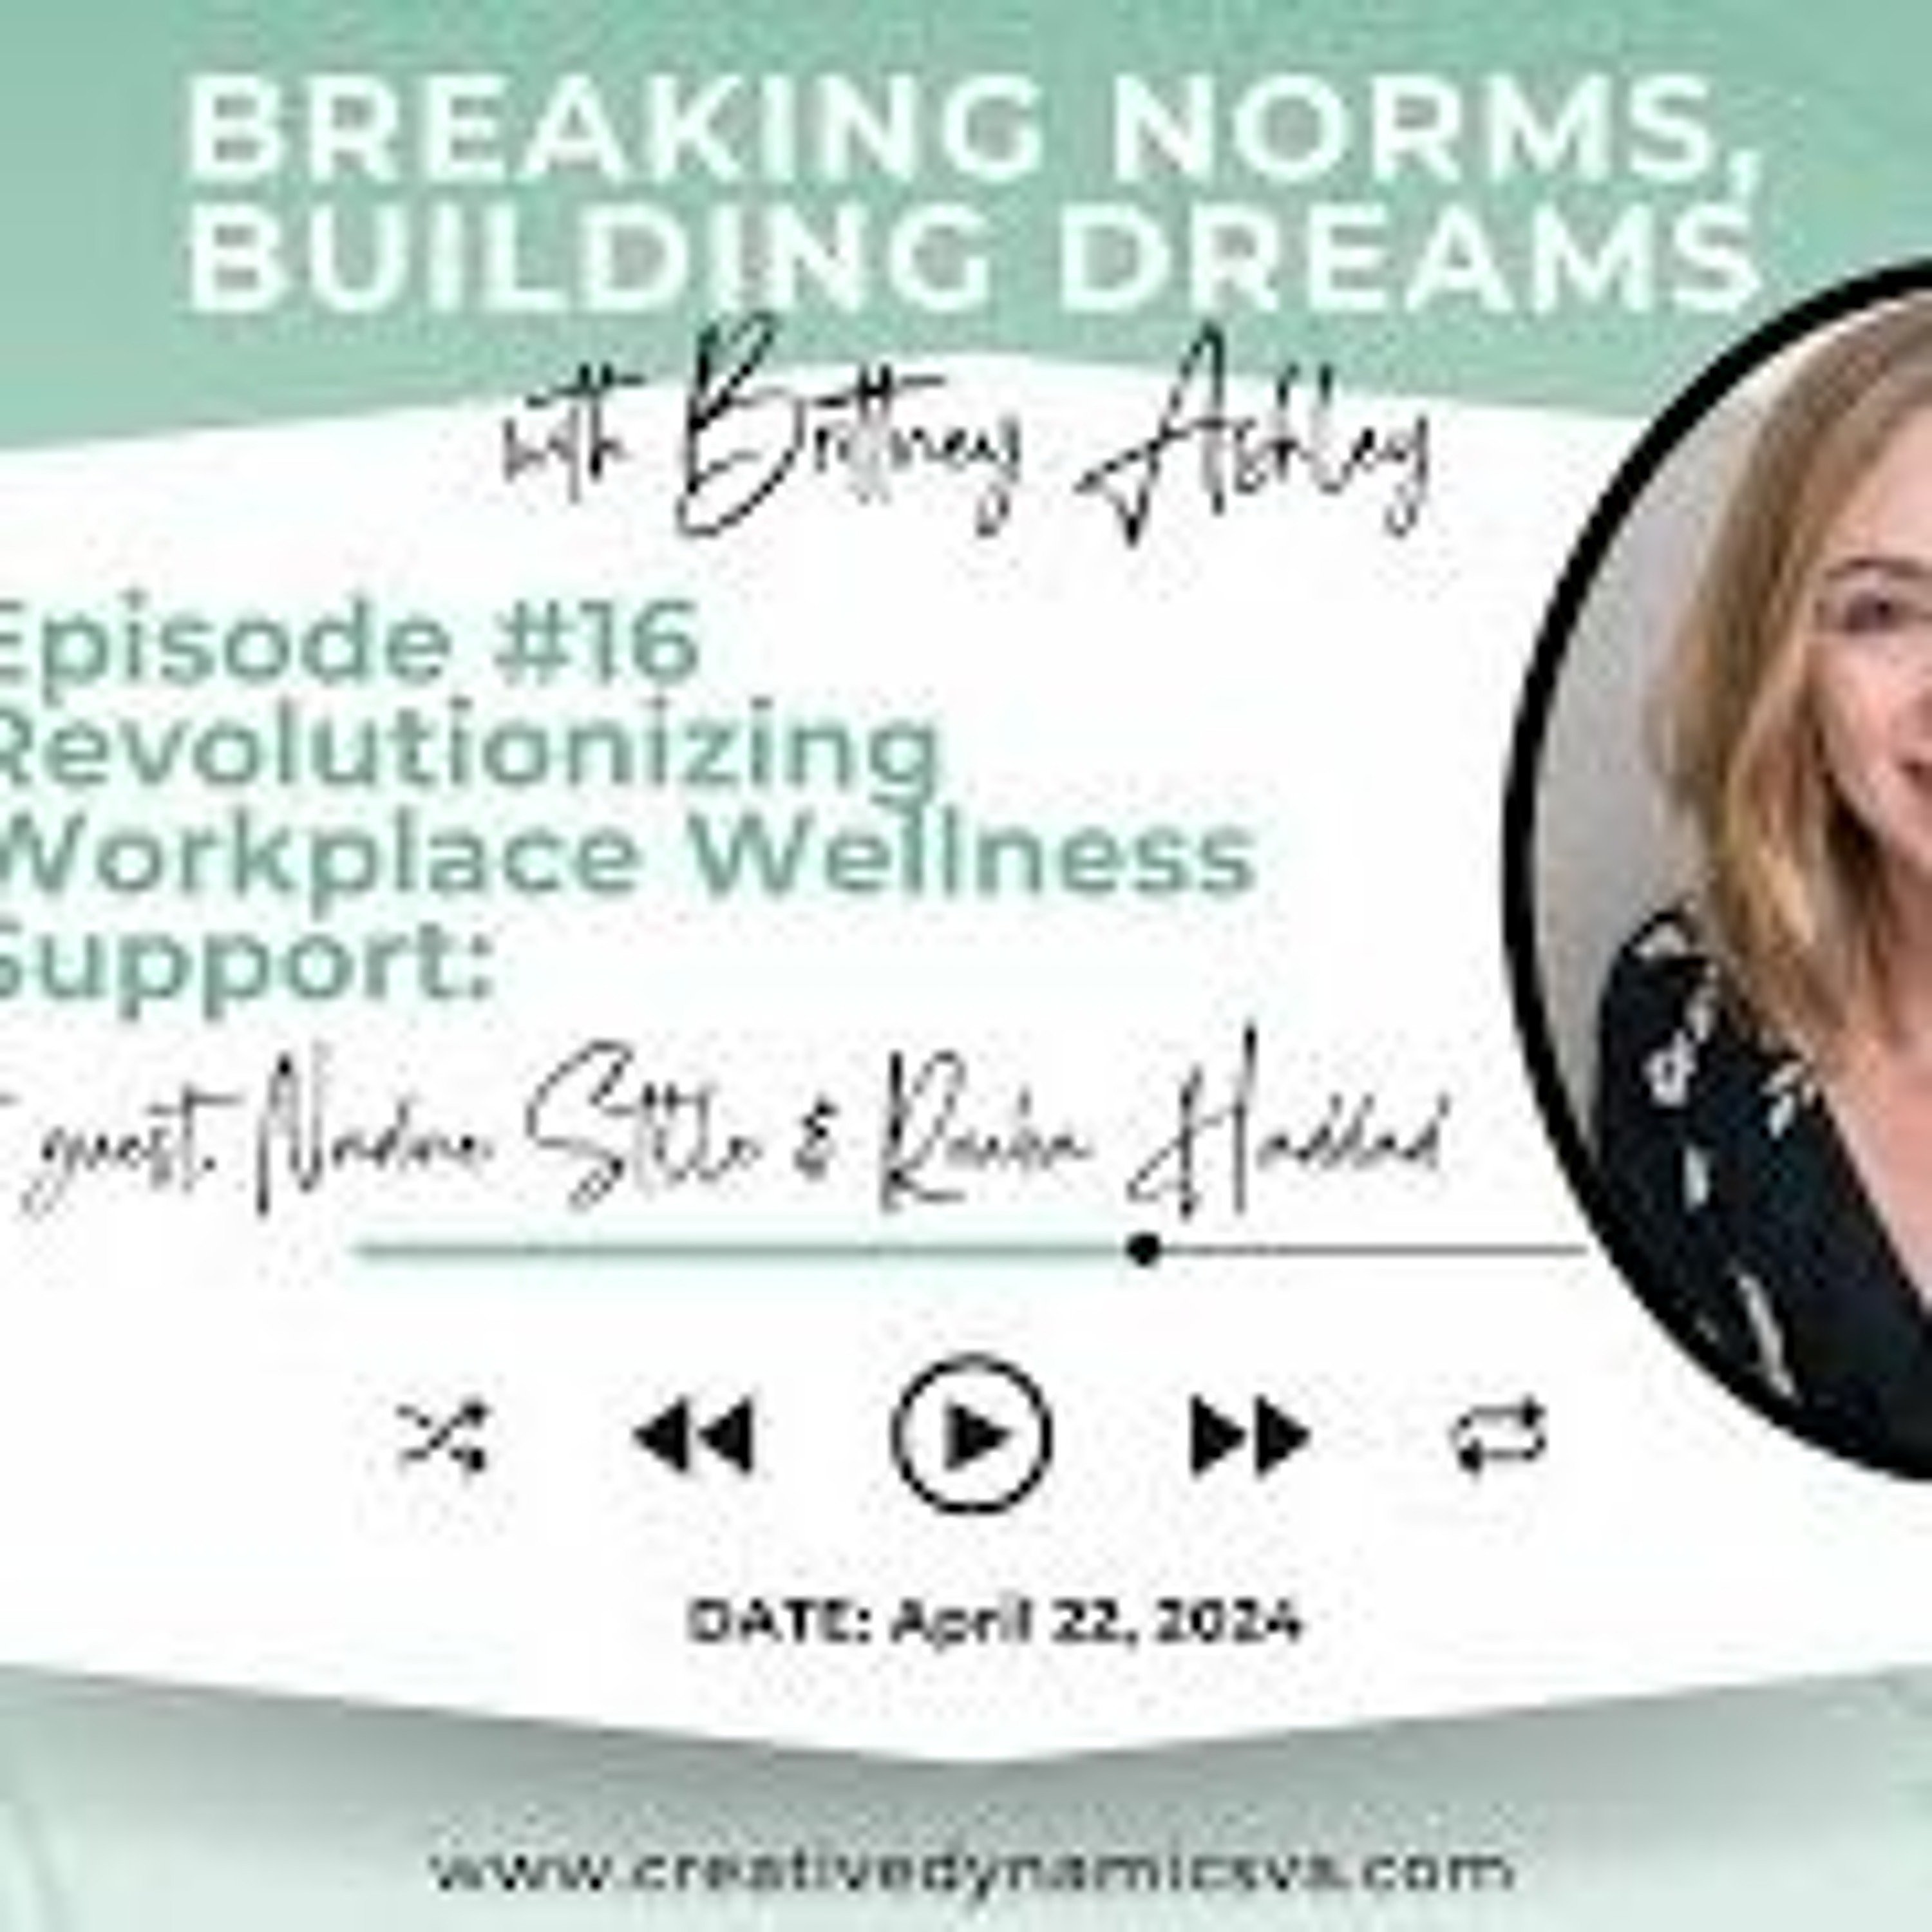 Breaking Norms  Building Dreams  Ep 16 Workplace Wellness Support With Nadine Stille & Rouba Haddad